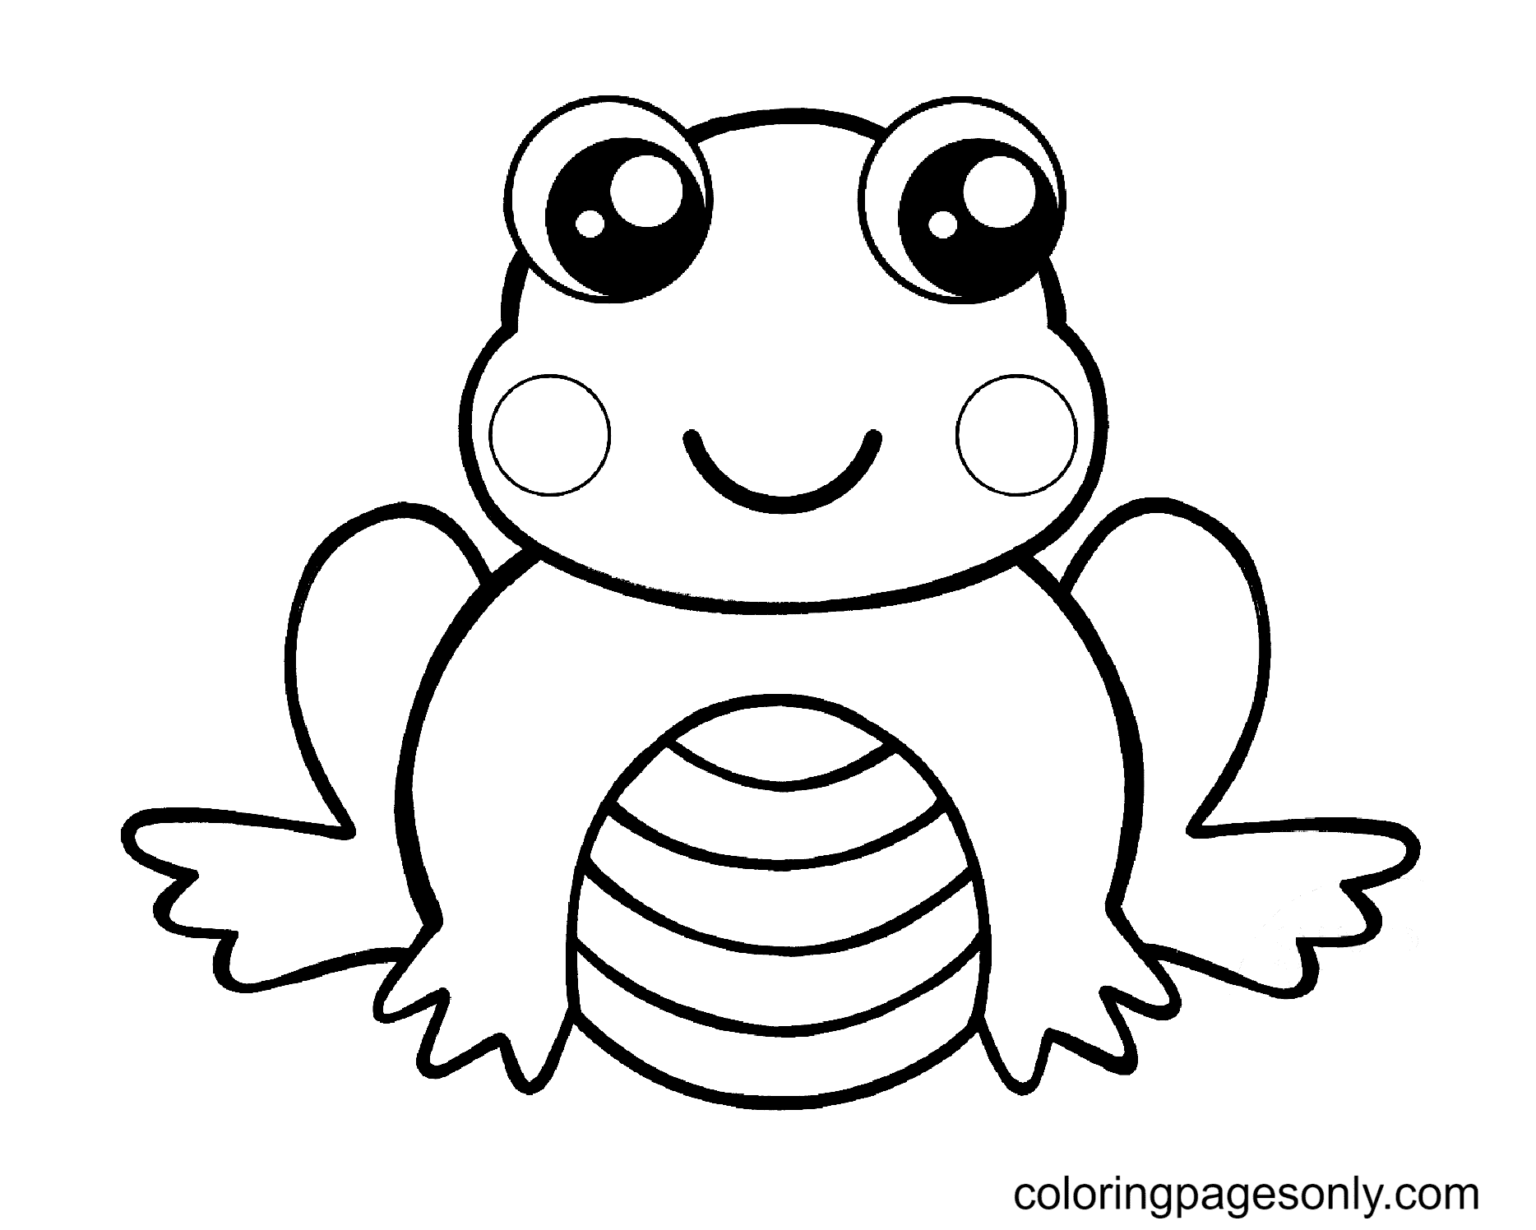 Frog Coloring Pages Printable for Free Download